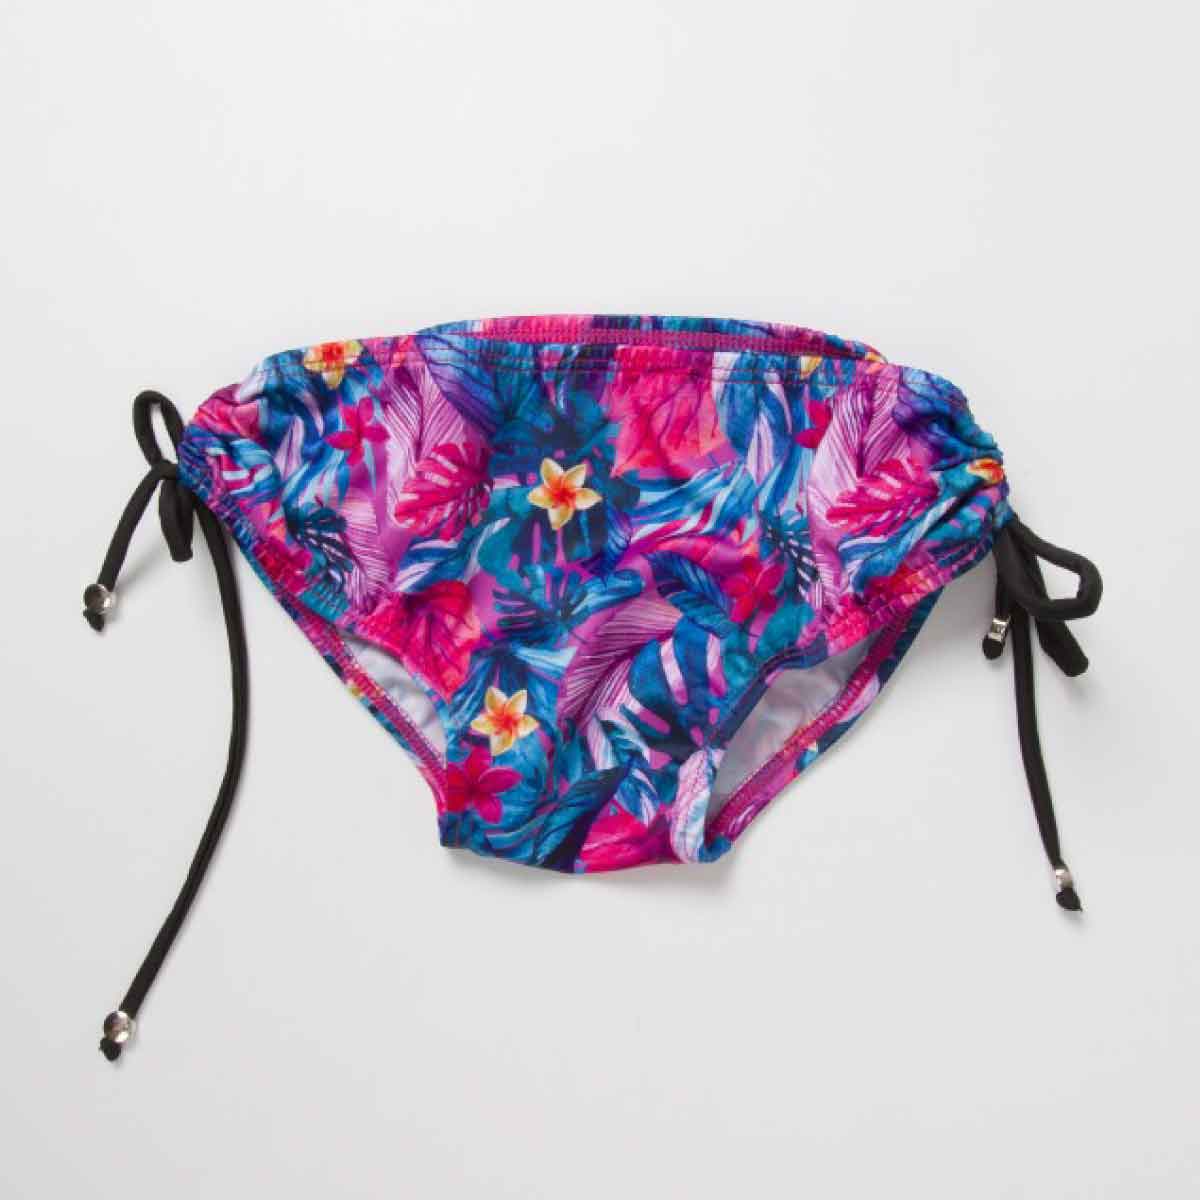 Radiance Tropical Fruits Two Piece